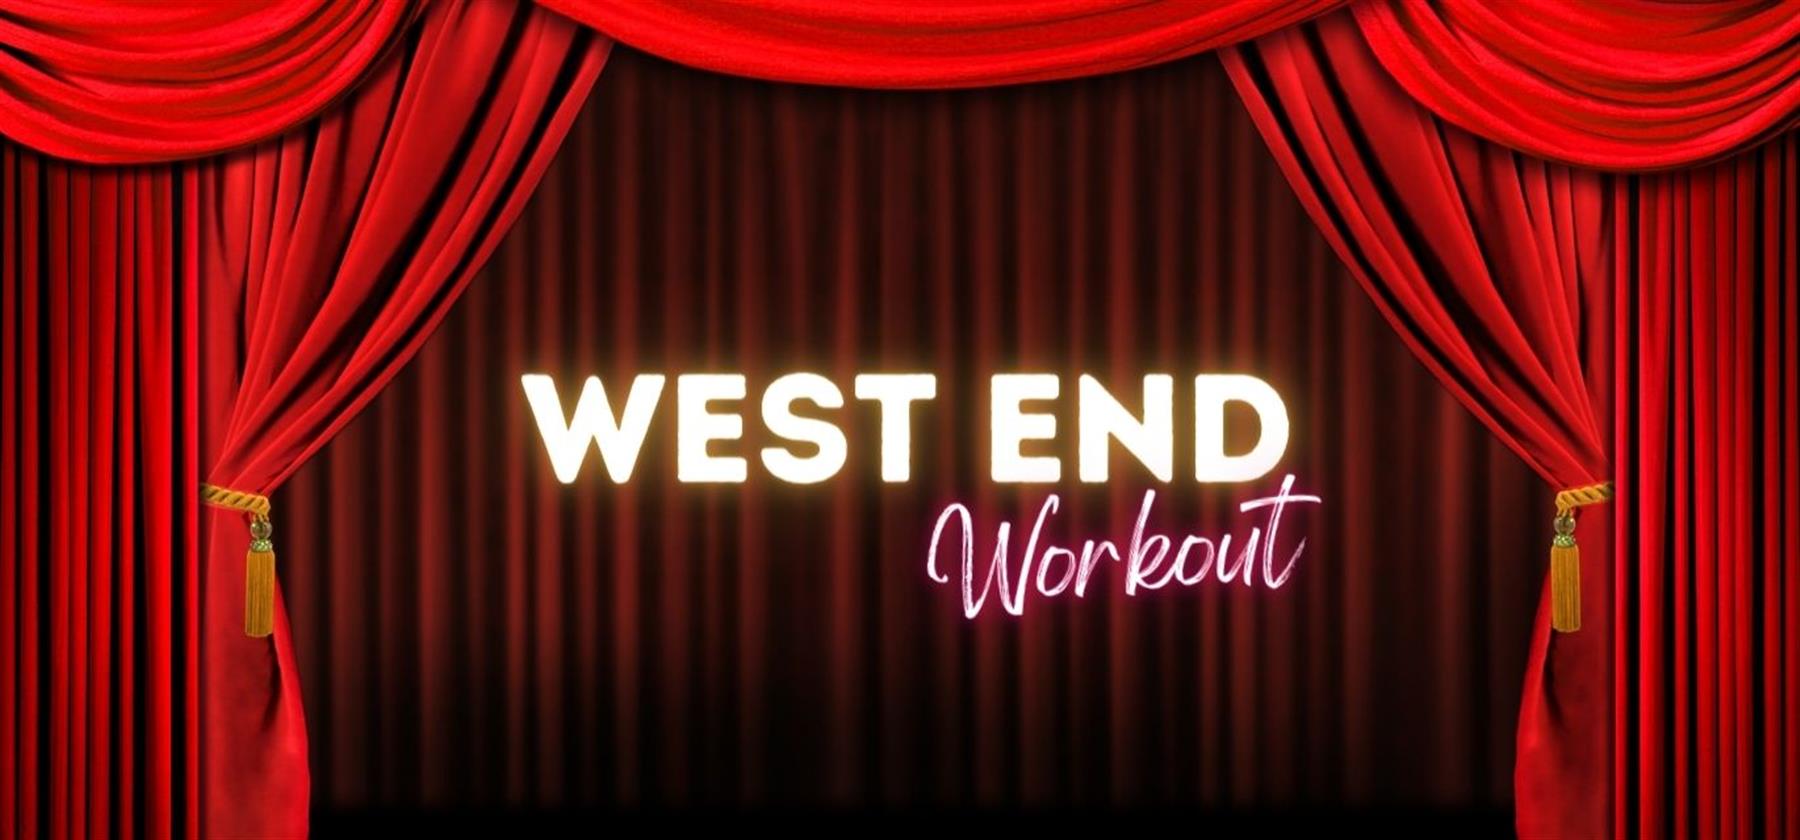 West End Workout